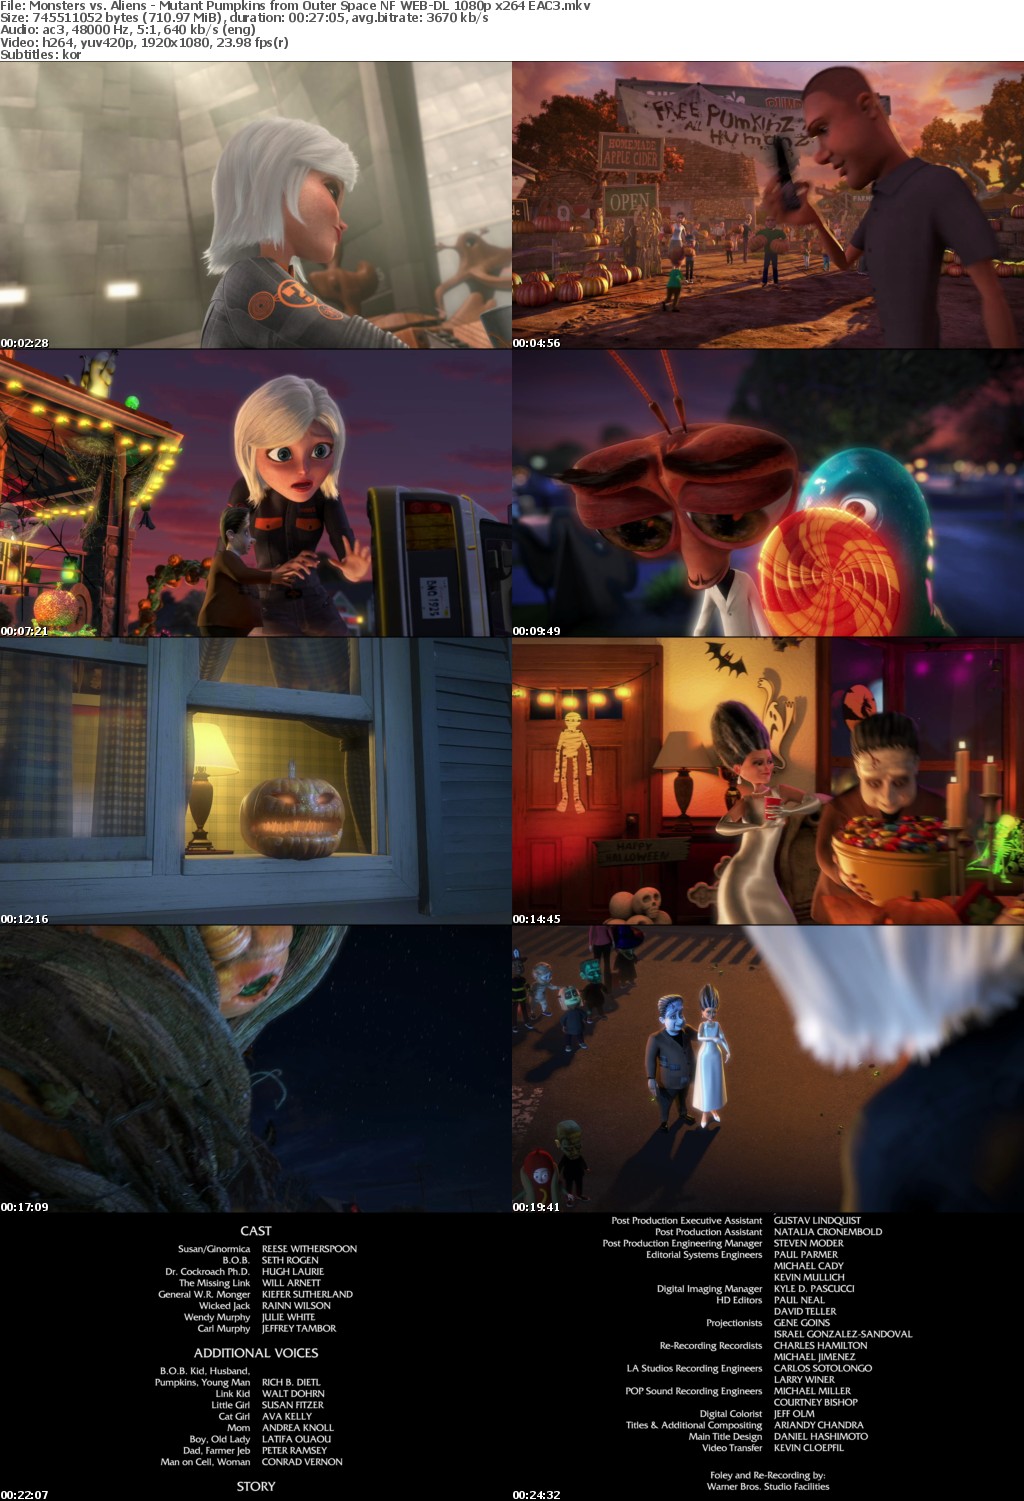 Monsters vs Aliens - Mutant Pumpkins from Outer Space NF WEB-DL 1080p x264 EAC3 mkv